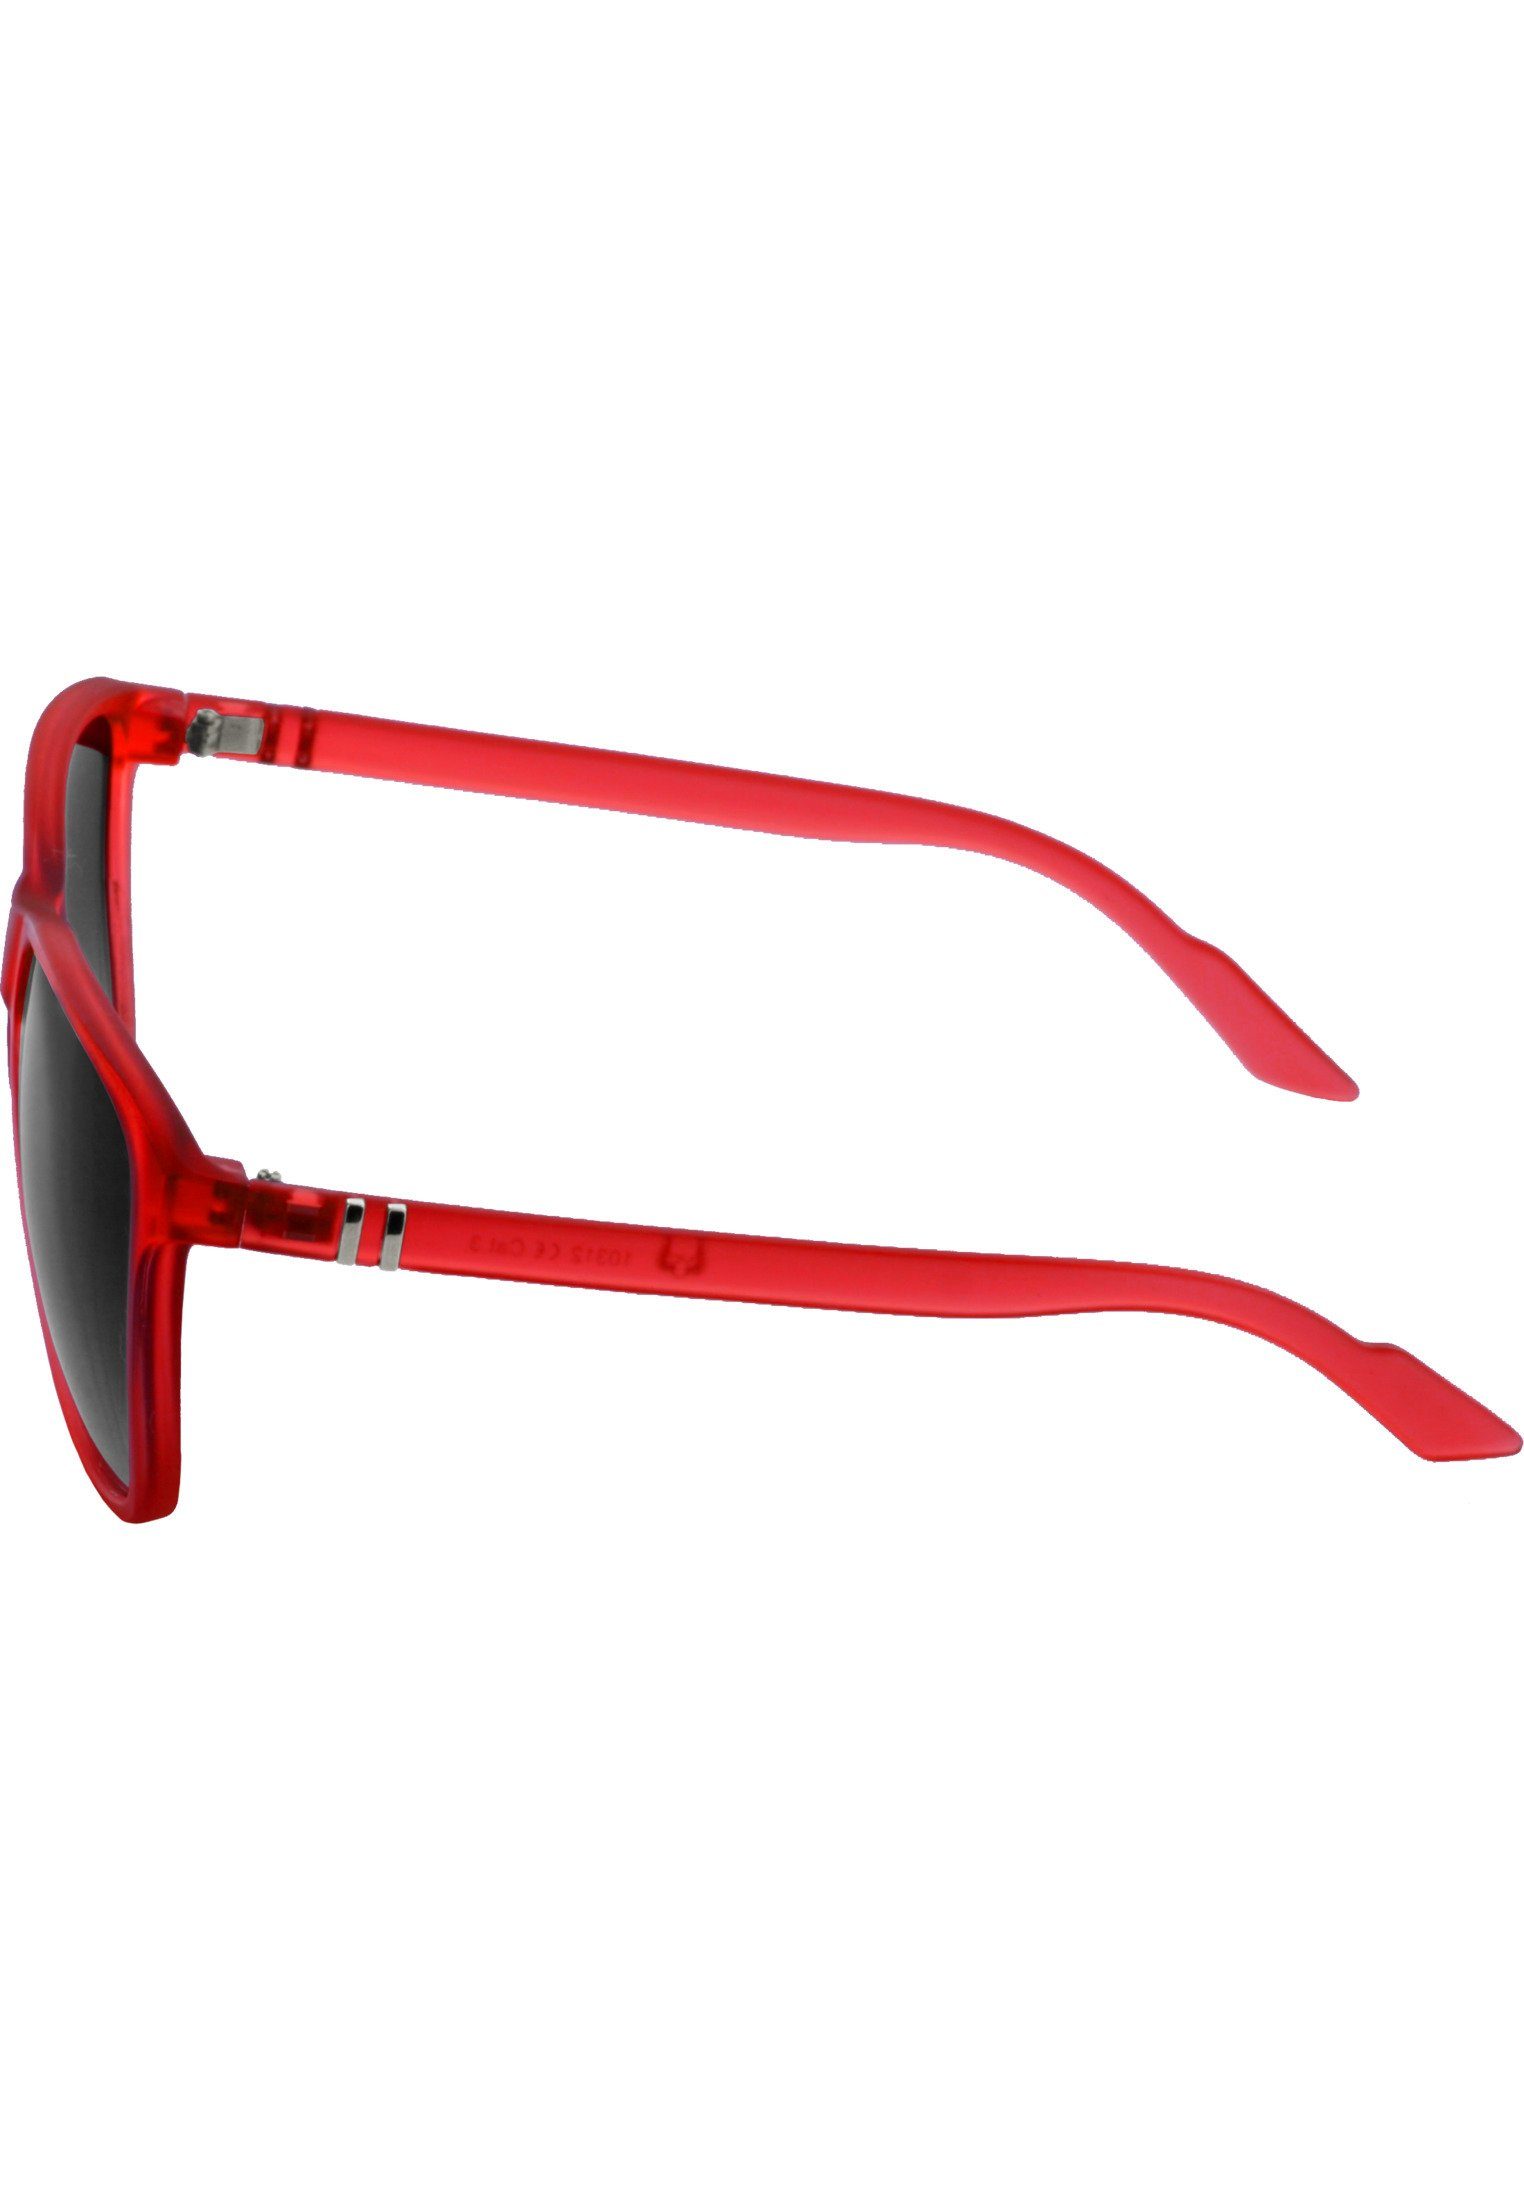 Sunglasses red Sonnenbrille Chirwa Accessoires MSTRDS